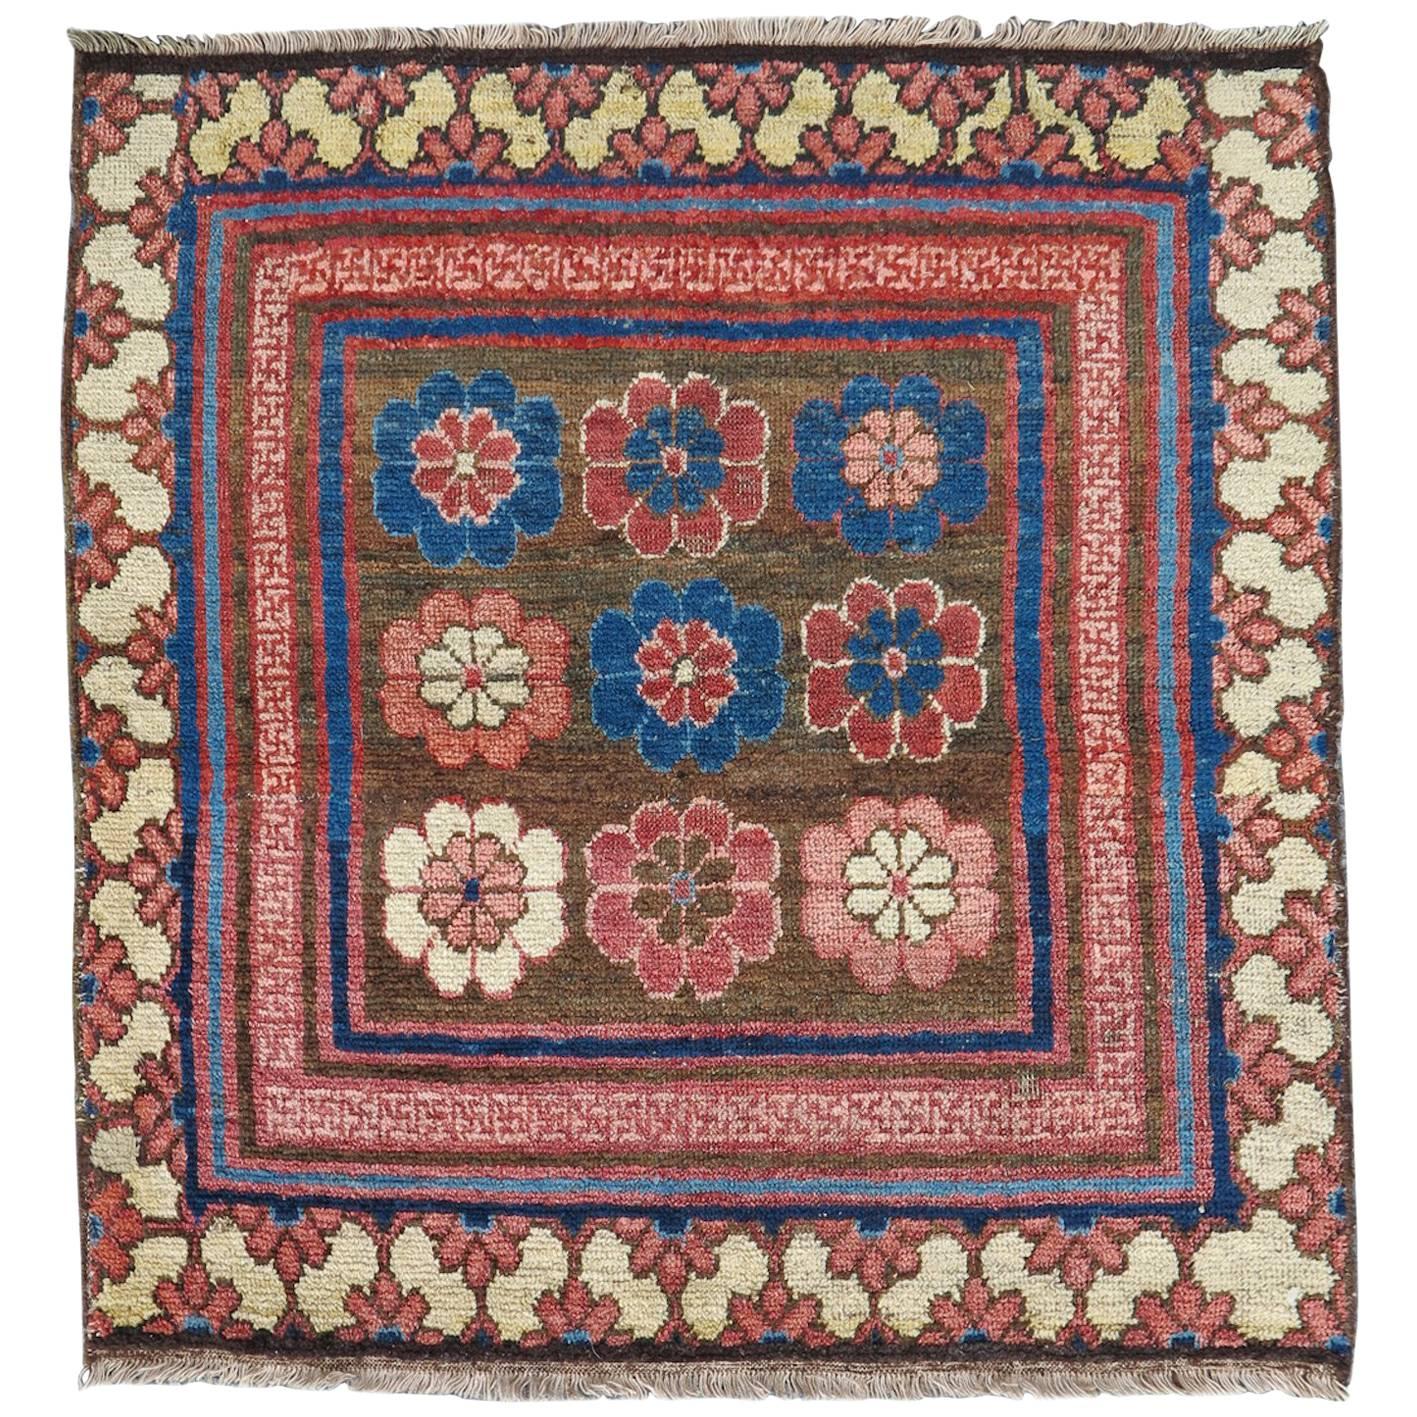 Early 19th Century Rose and Blue Khotan Fragment Rug